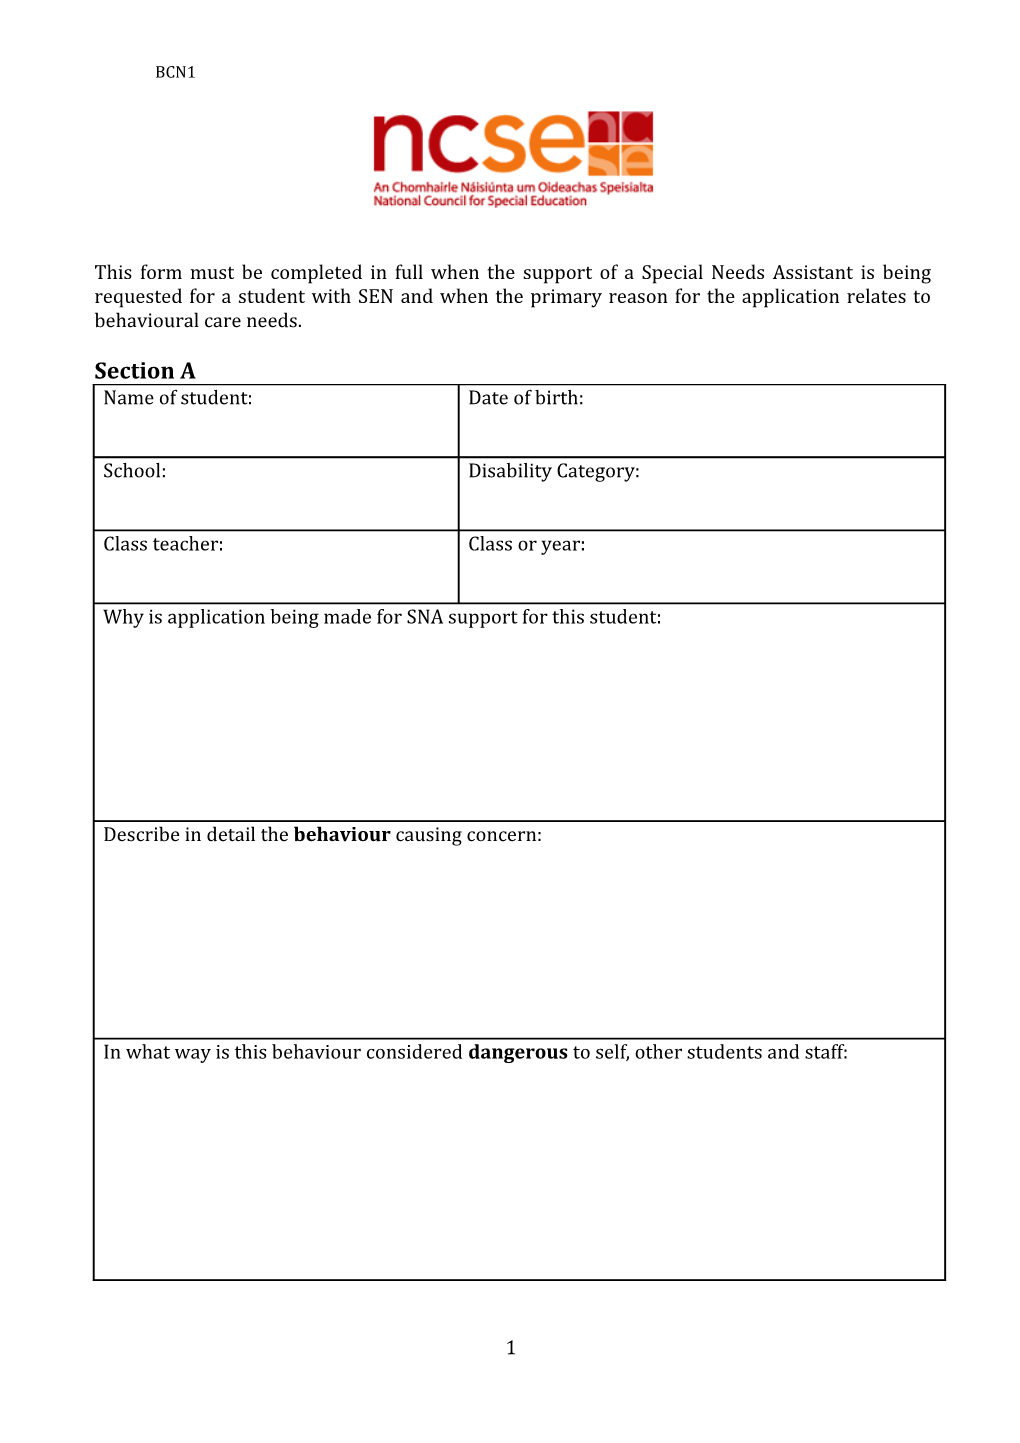 This Form Must Be Completed in Full When the Support of a Special Needs Assistant Is Being